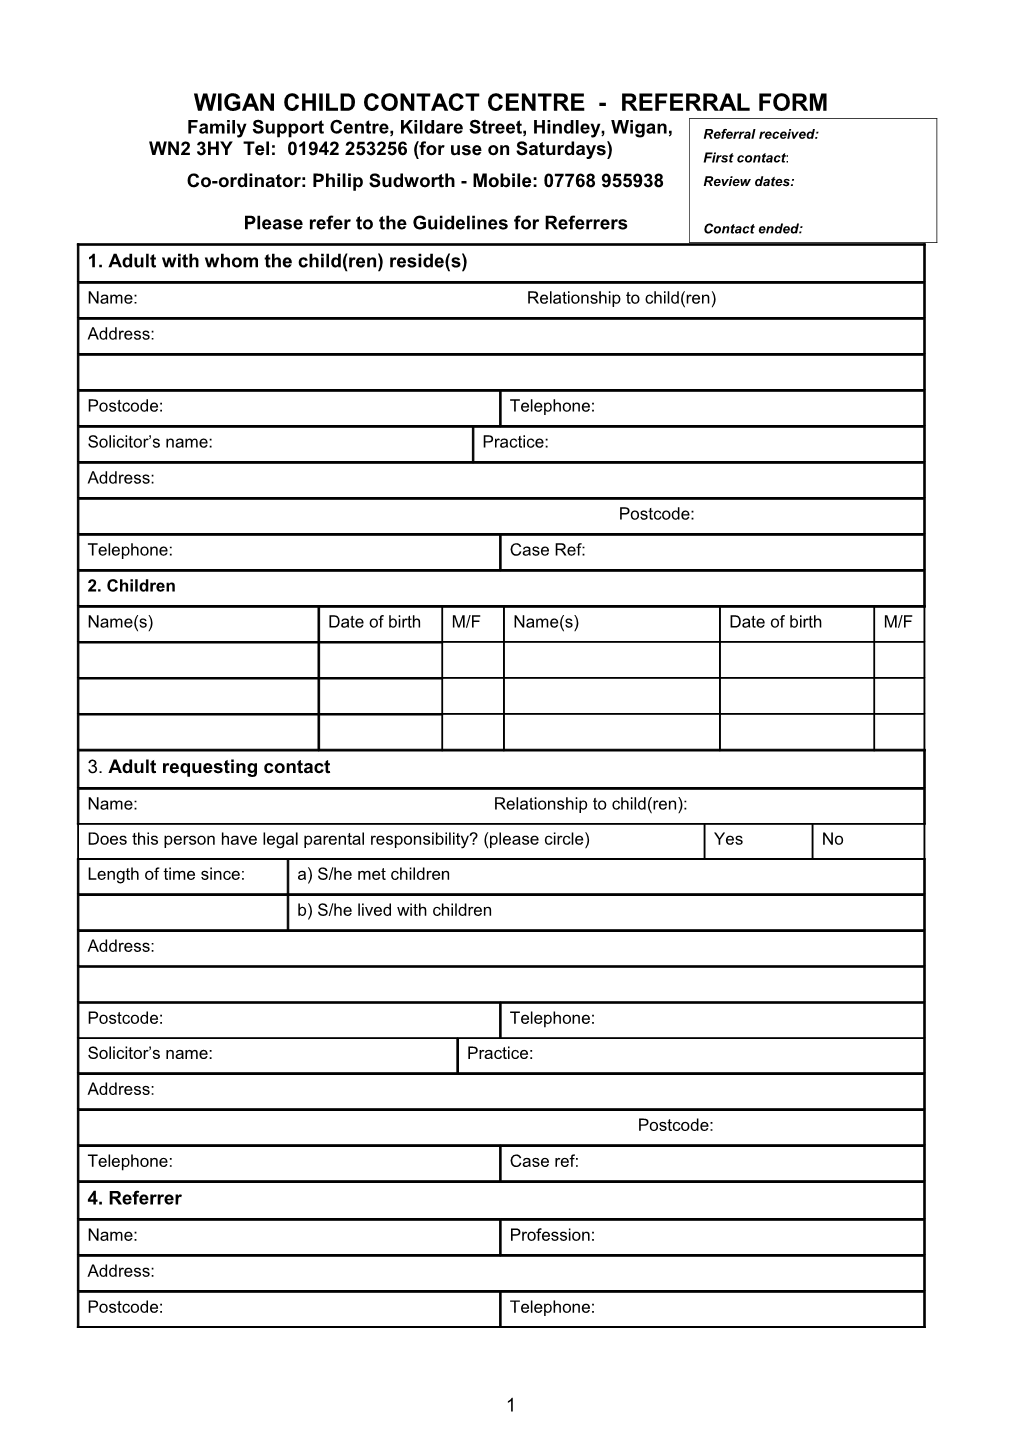 WIGAN CHILD CONTACT CENTRE - Referral Form